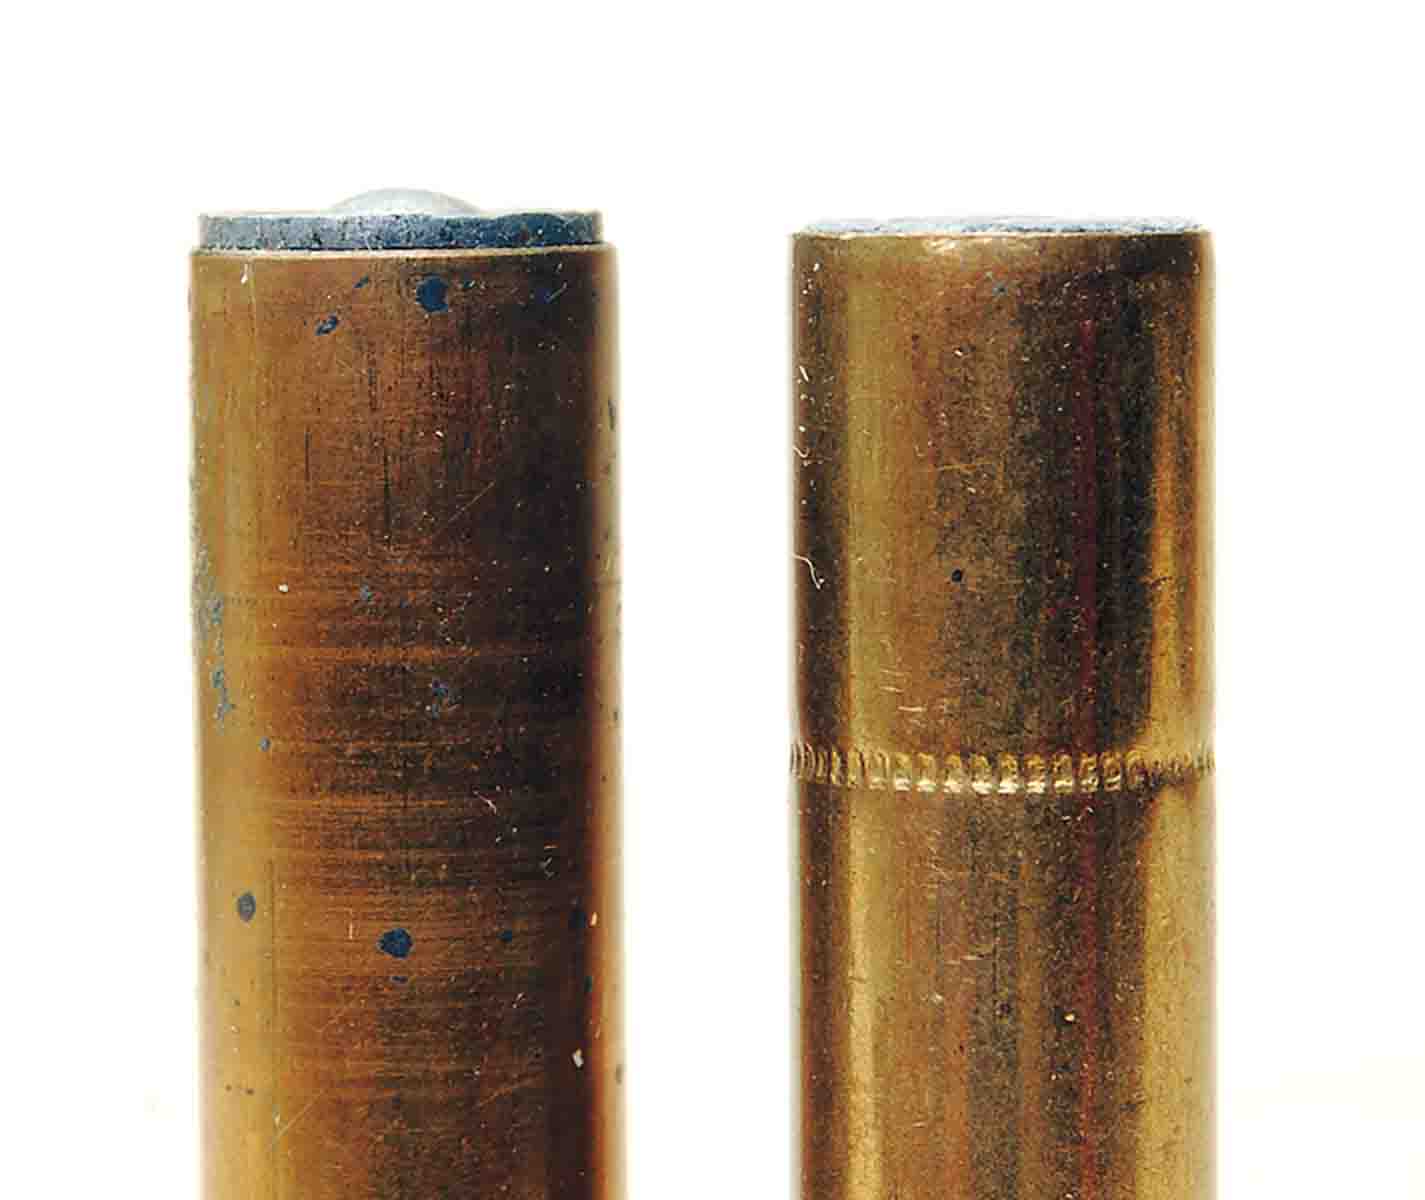 Two 148-grain, hollowbase, flush-seated wadcutters. Note how the bullet on the left is not quite flush, but leaves enough exposed for a light crimp.